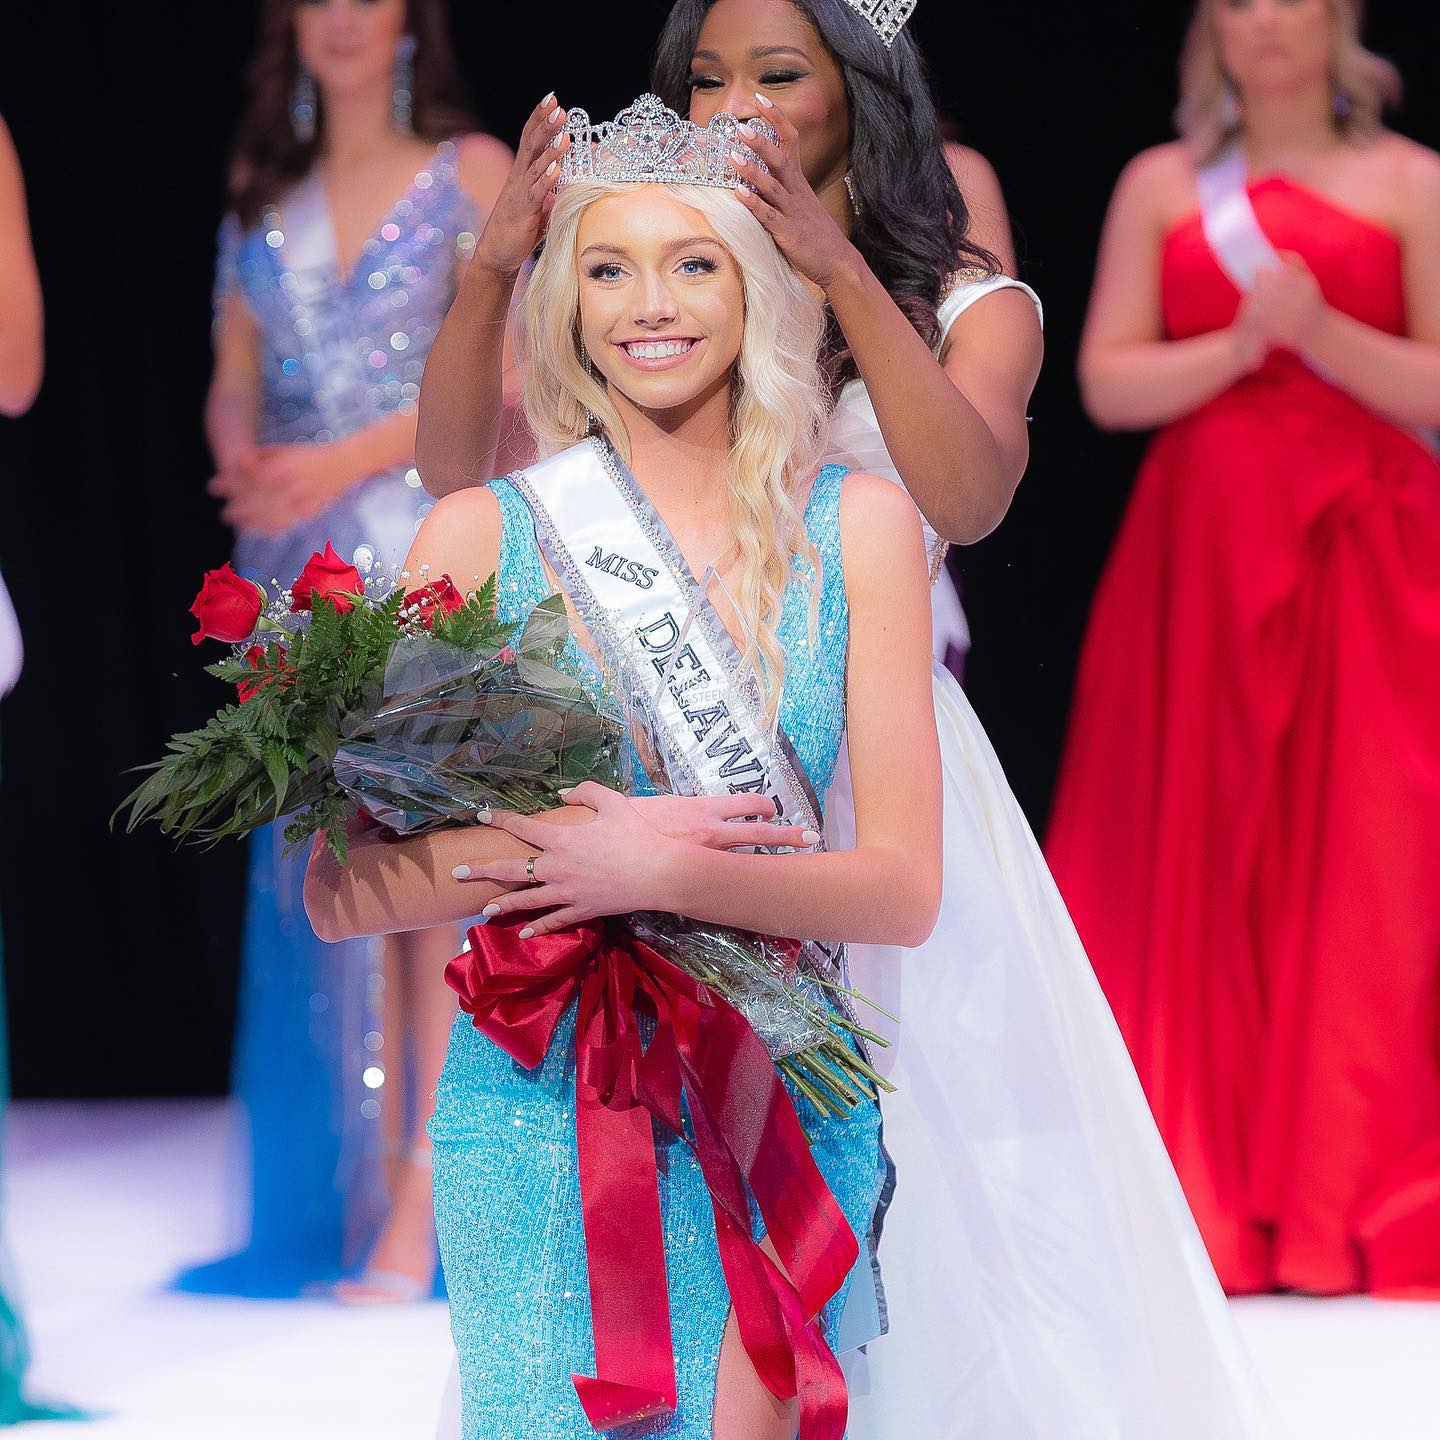 Ava MacMurray is crowned Miss Delaware Teen USA 2022